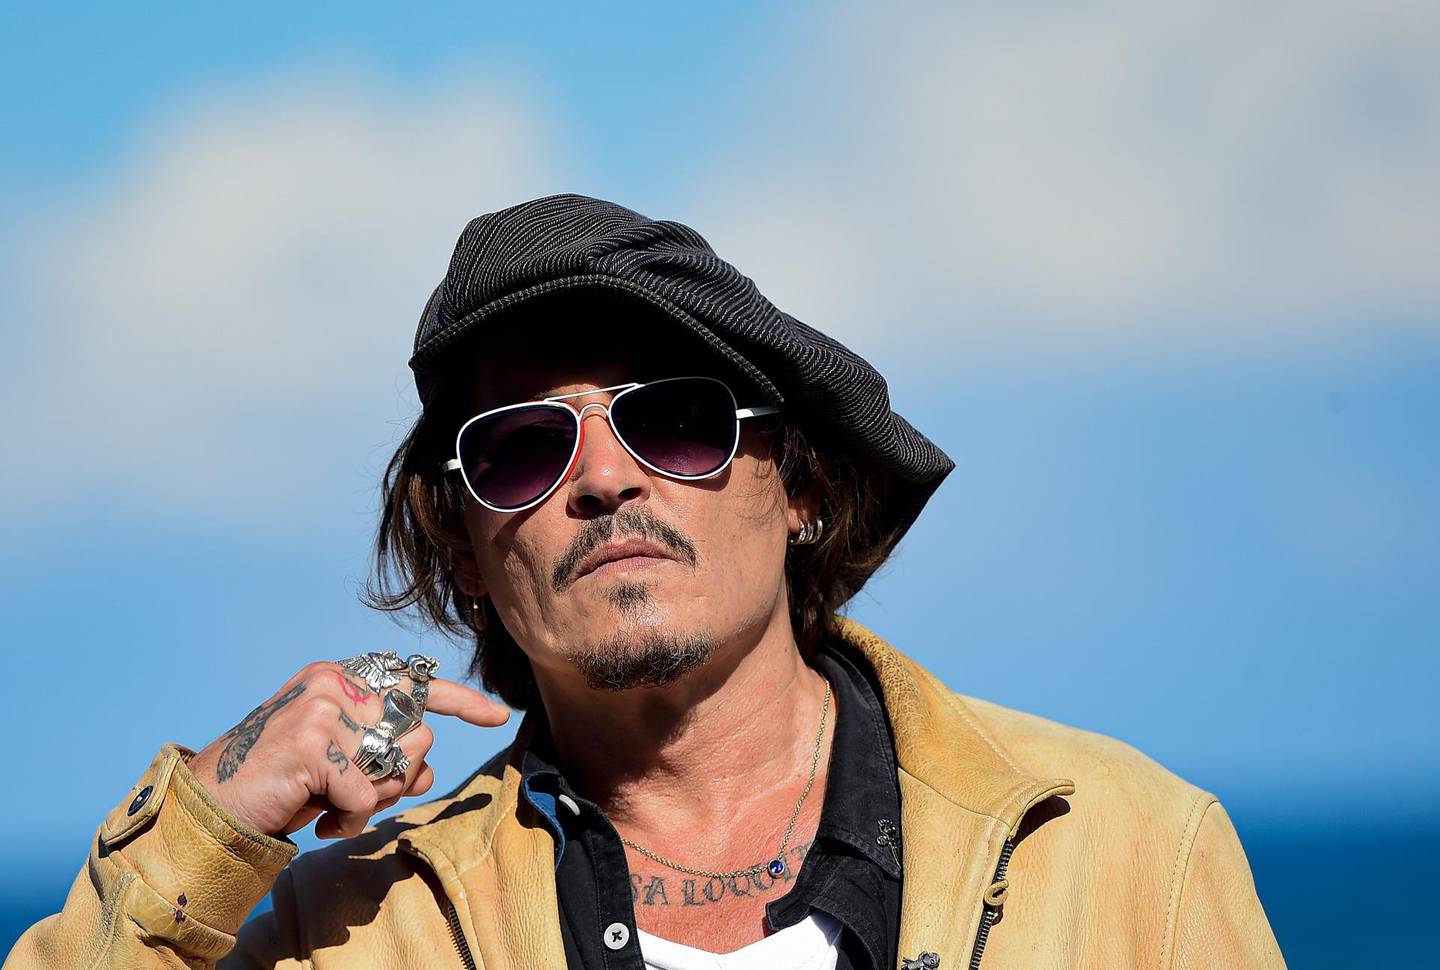 FILE - In this file photo dated Sunday, Sept. 20, 2020, US actor and film producer Johnny Deep during the photocall for his film "Crock of Gold: A Few Rounds with Shane Macgoman" at the 68th San Sebastian Film Festival, in San Sebastian, northern Spain.  In a letter to fans, Friday Nov.6, 2020, Depp said he had been "asked to resign" from his role in the Fantastic Beasts film franchise, after losing a libel case labelling him a wife beater, a judgement he said he plans to appeal against. (AP Photo/Alvaro Barrientos, FILE)